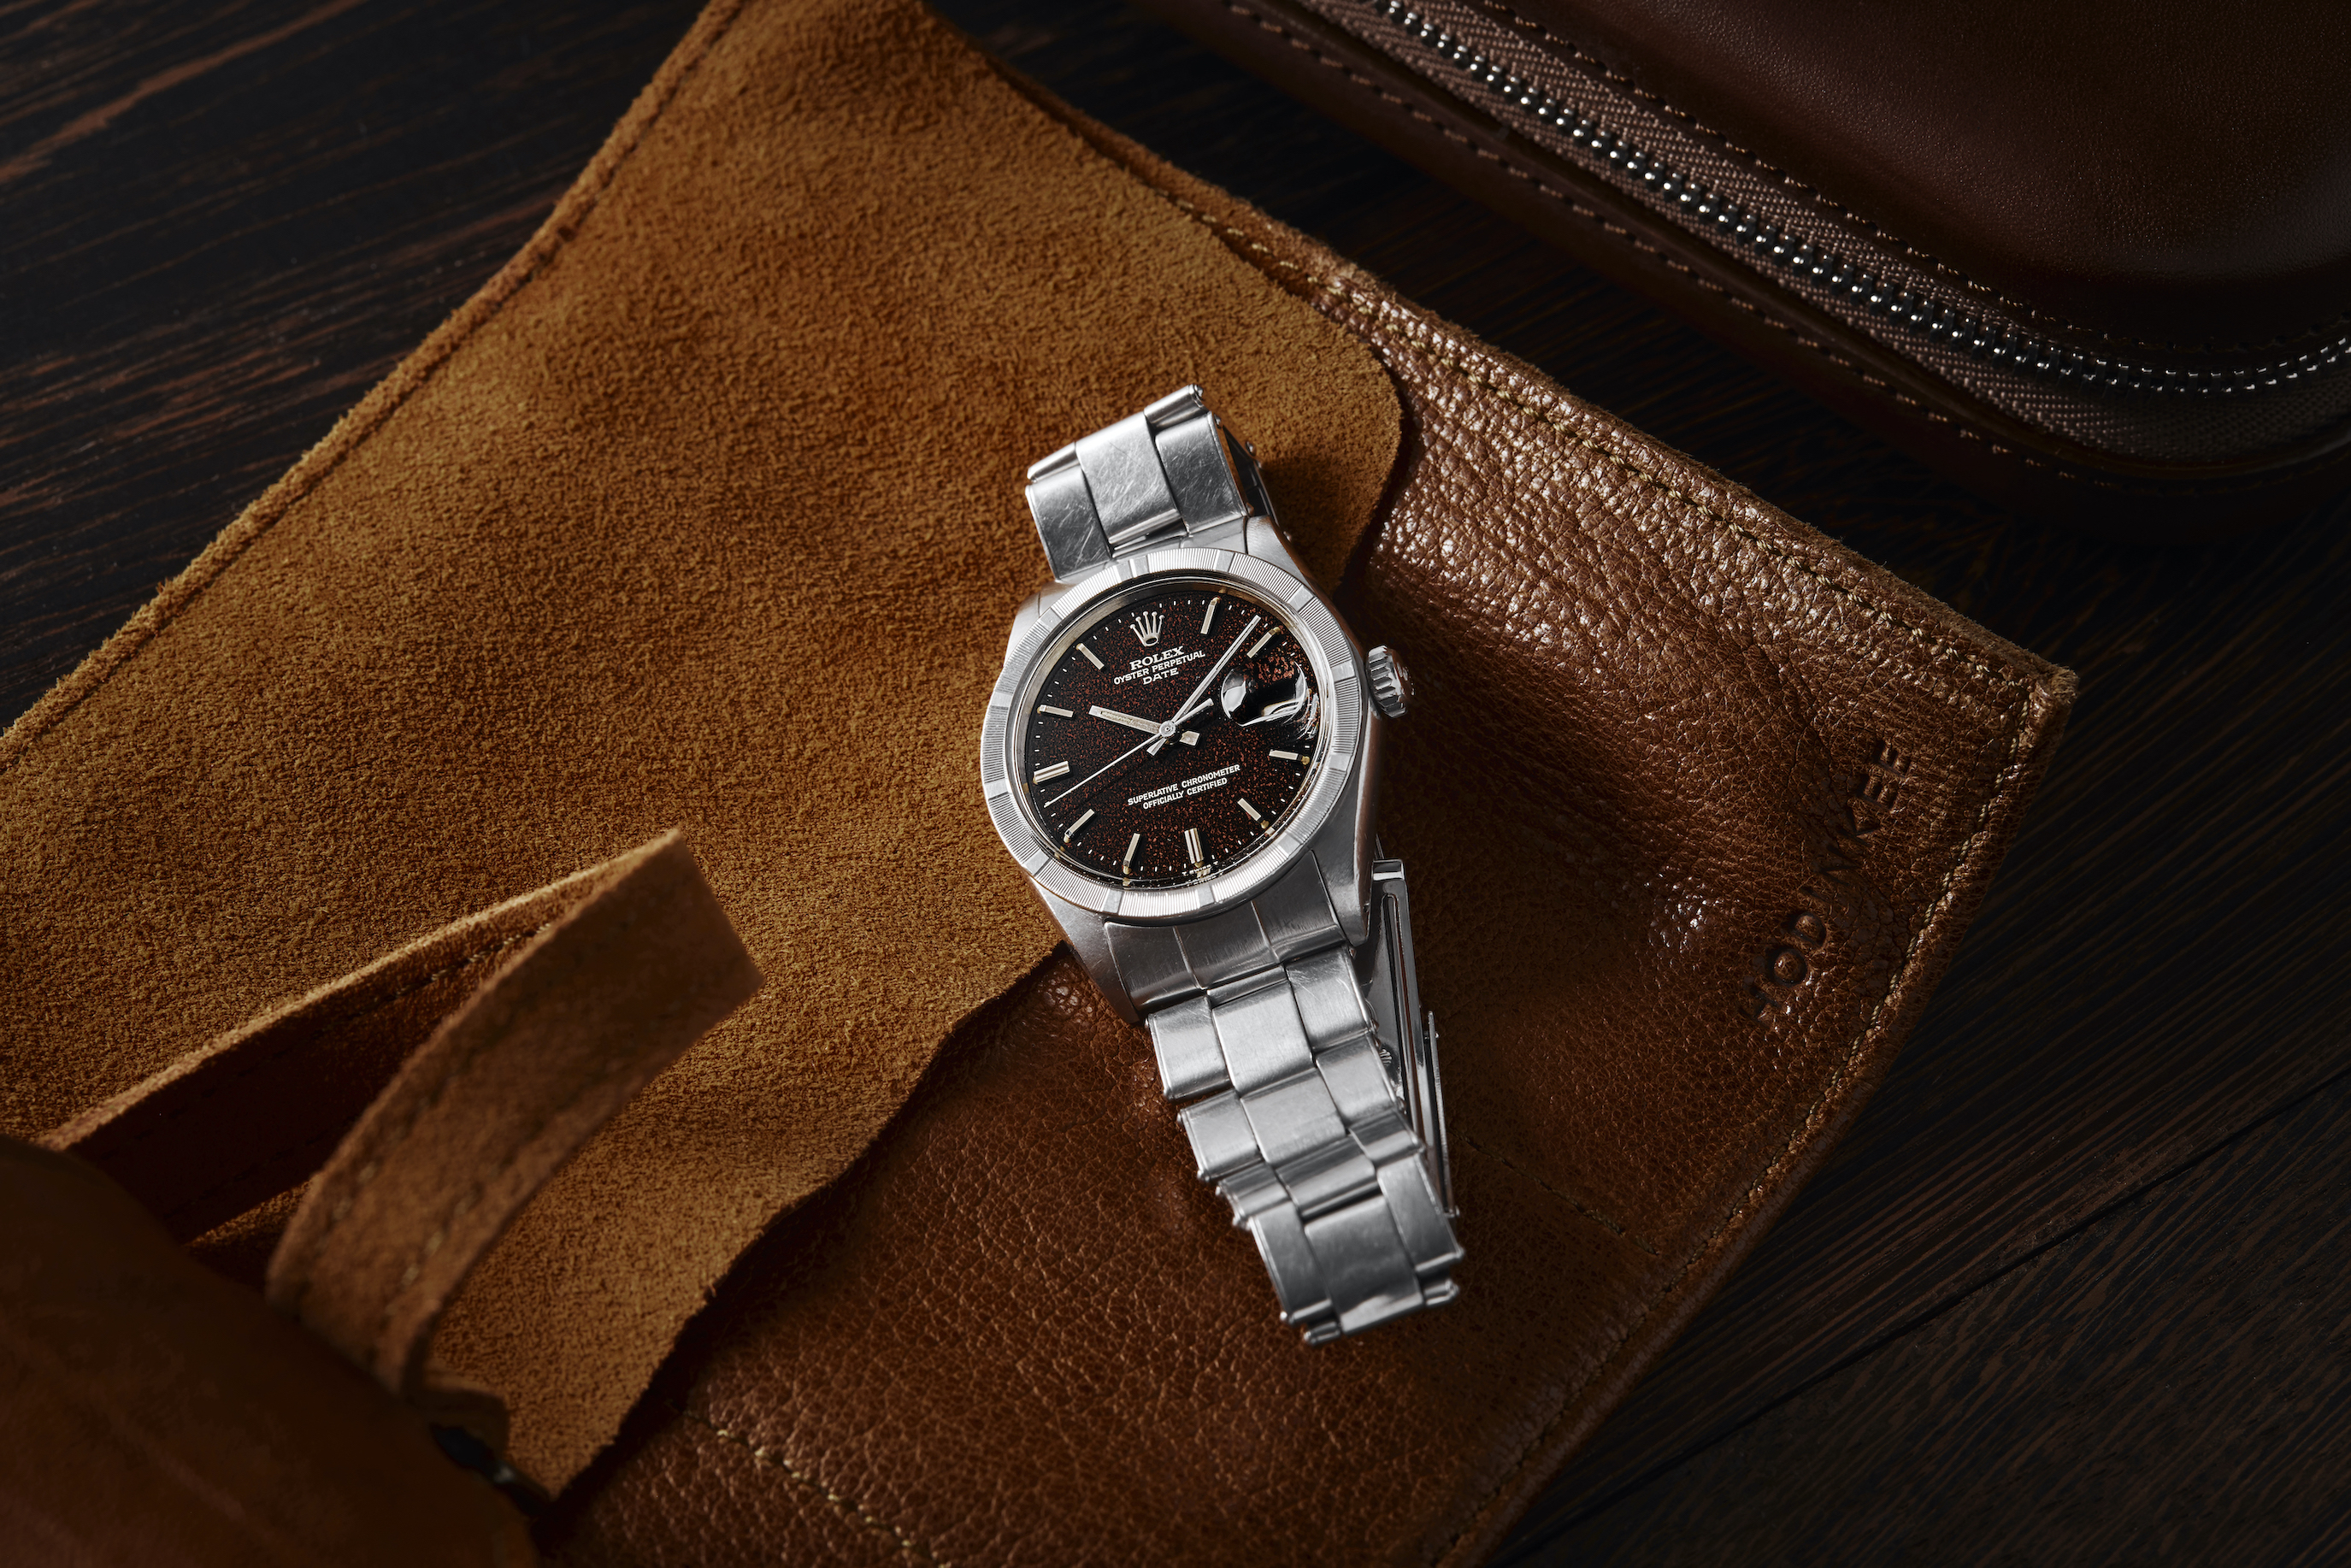 New Vintage Watches In The Hodinkee Shop